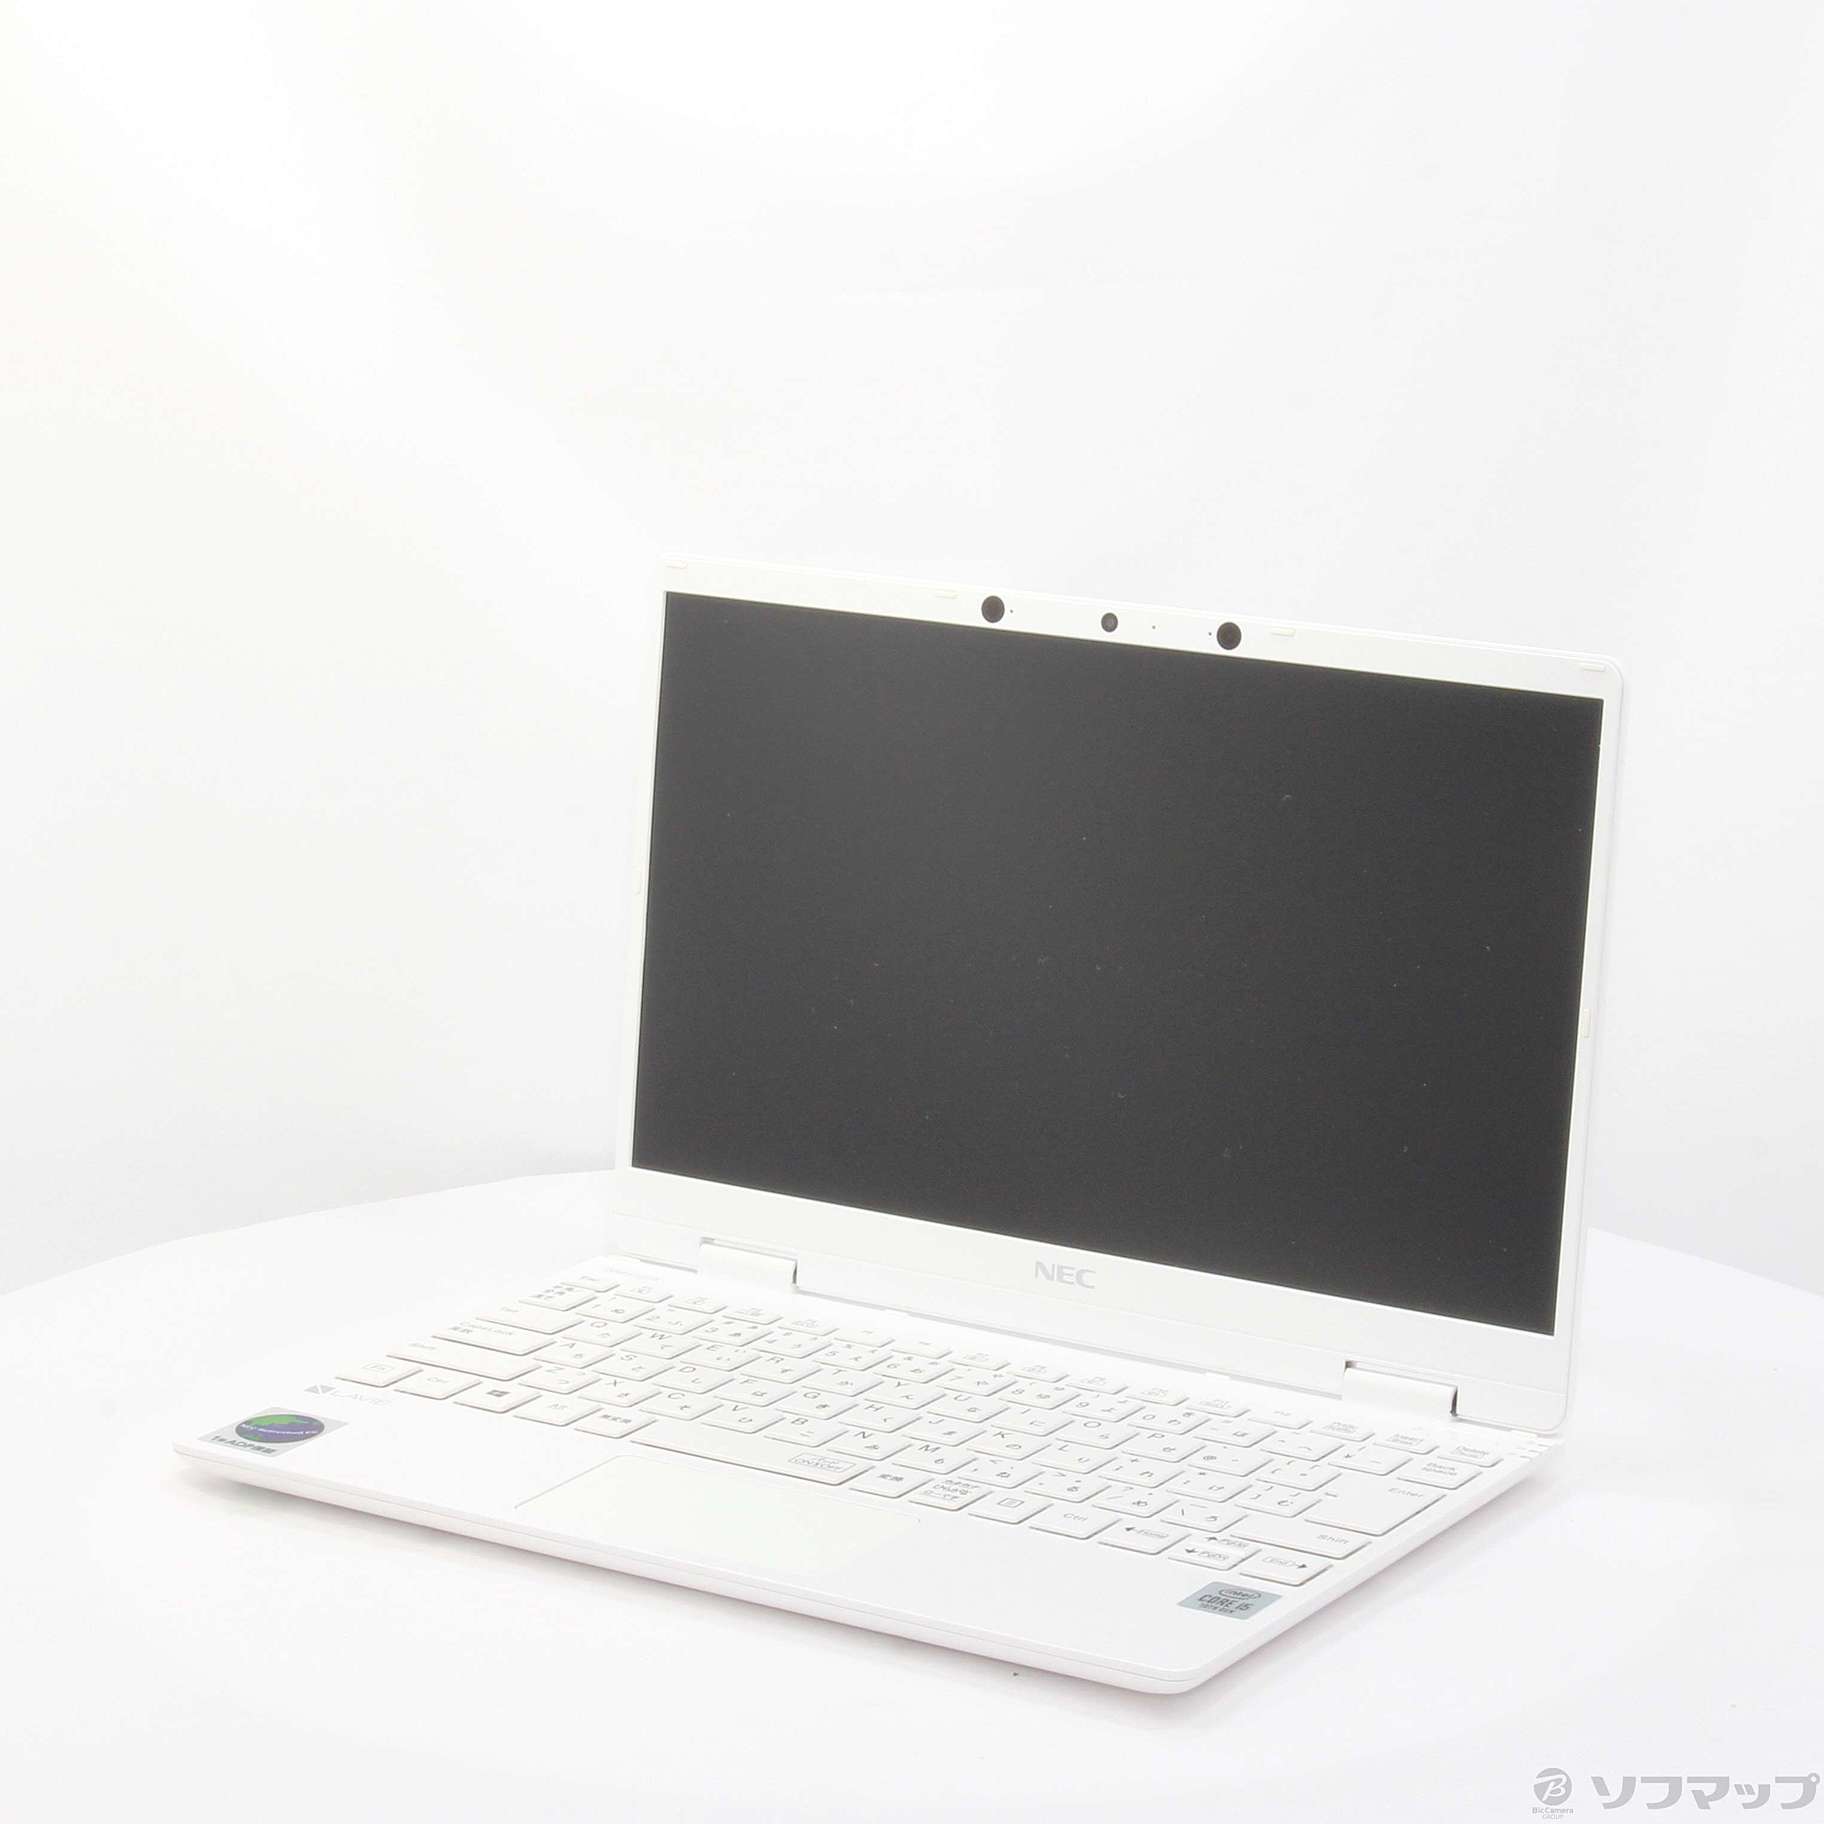 LaVie Note Mobile PC-NM550RAW パールホワイト 〔NEC Refreshed PC〕 〔Windows 10〕  ≪メーカー保証あり≫